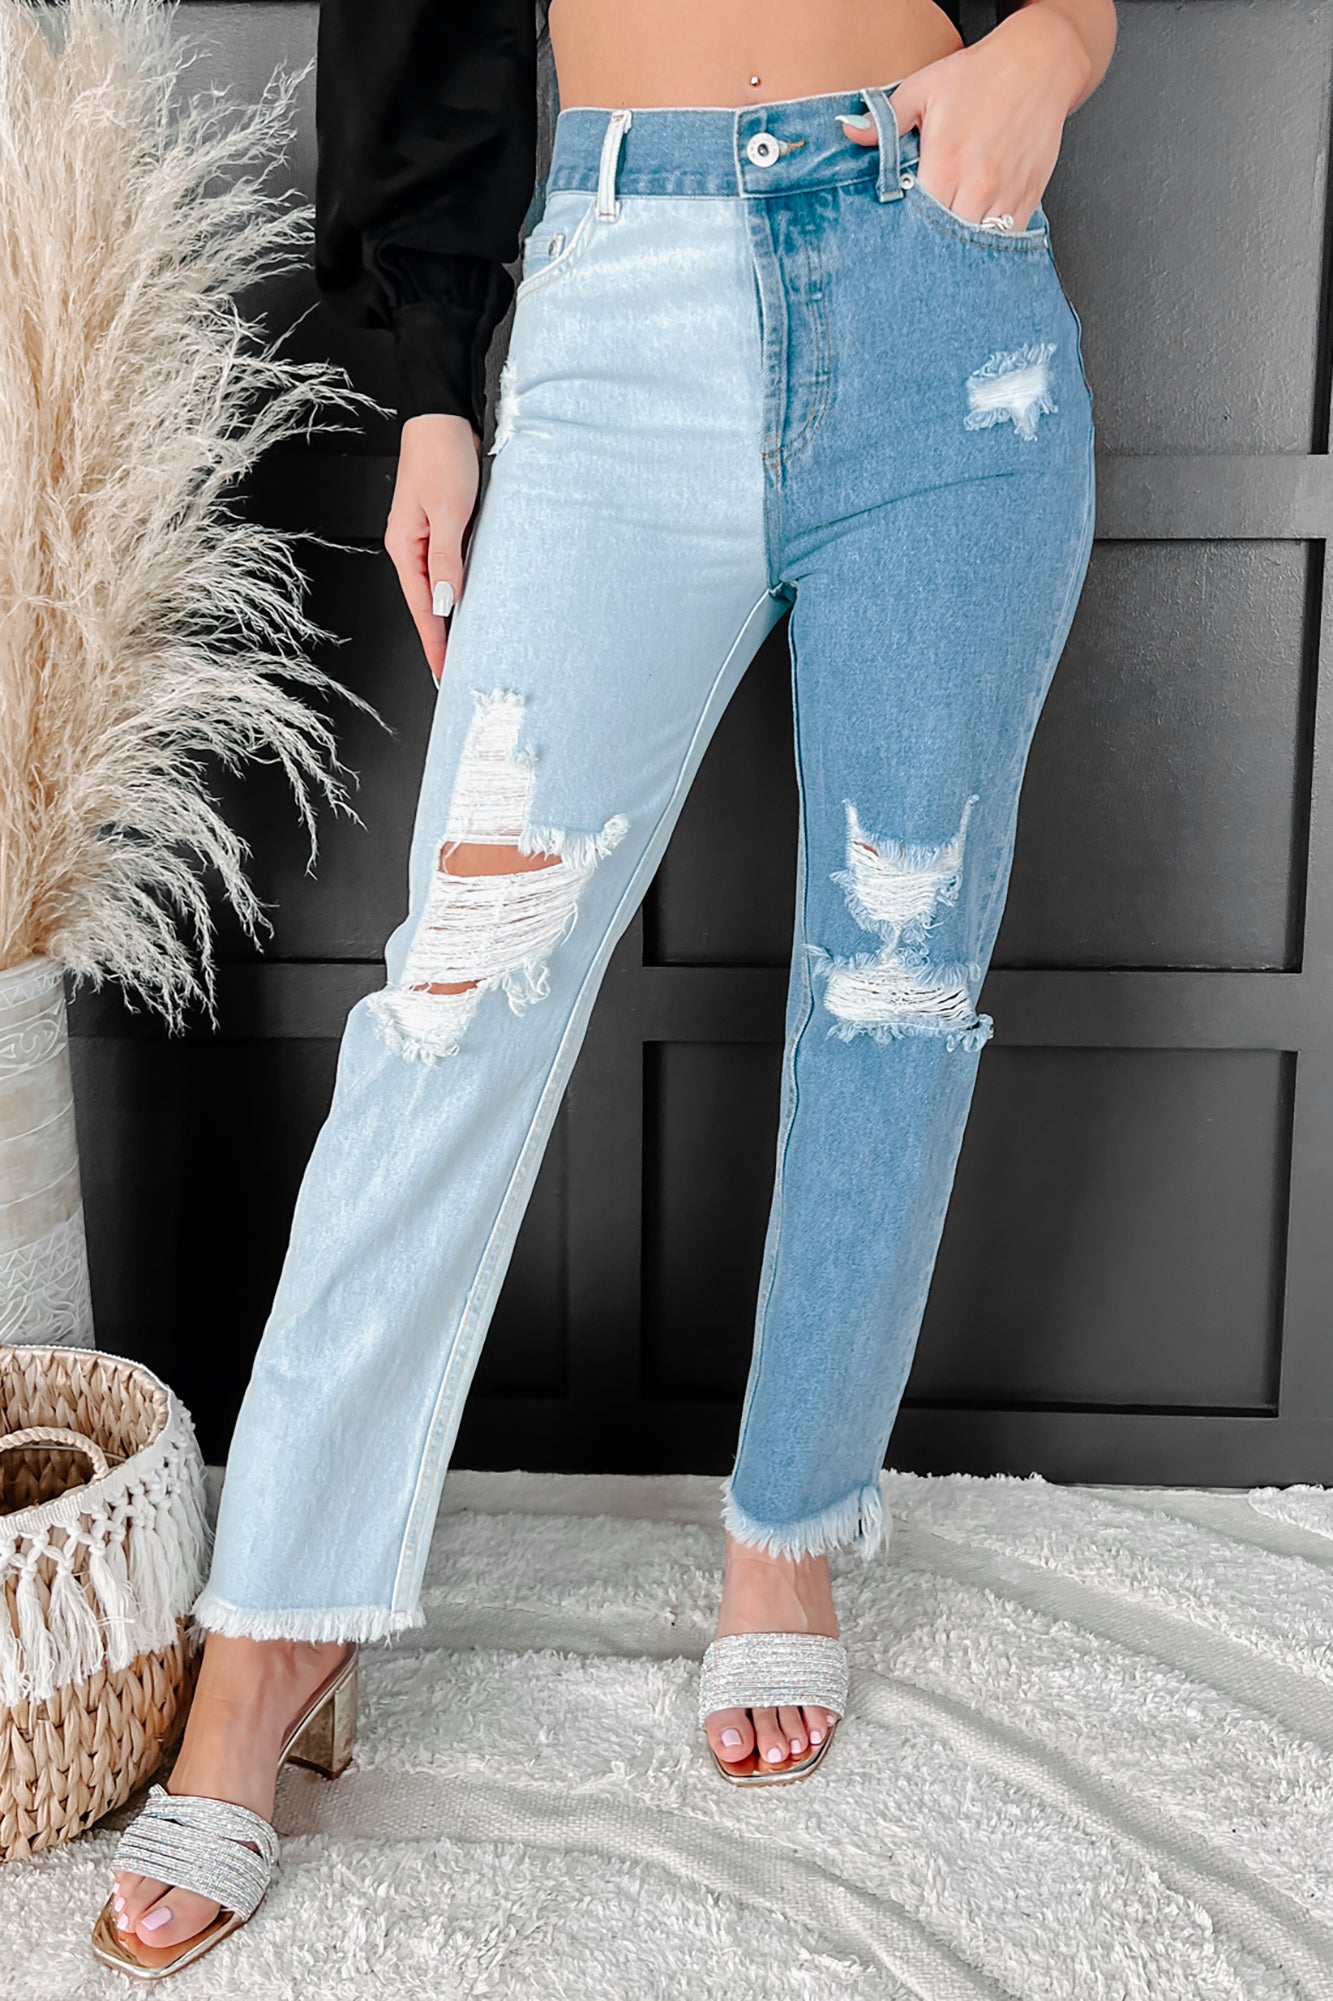 NEW Shein Distressed High-Waisted Mom Jeans Size XS